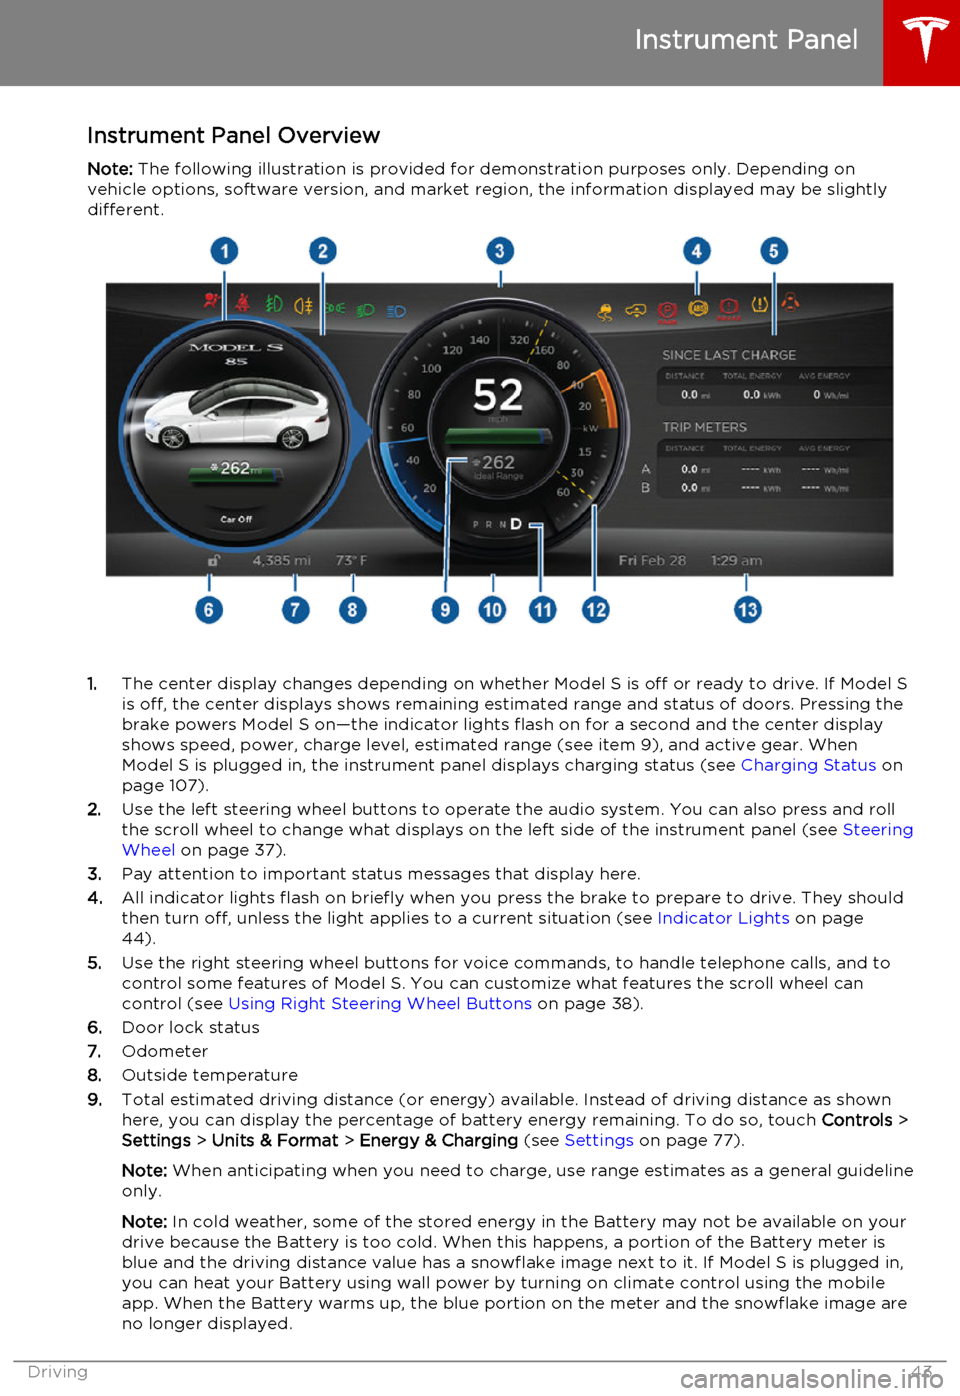 TESLA MODEL S 2015 Service Manual Instrument Panel OverviewNote:  The following illustration is provided for demonstration purposes only. Depending on
vehicle options, software version, and market region, the information displayed may